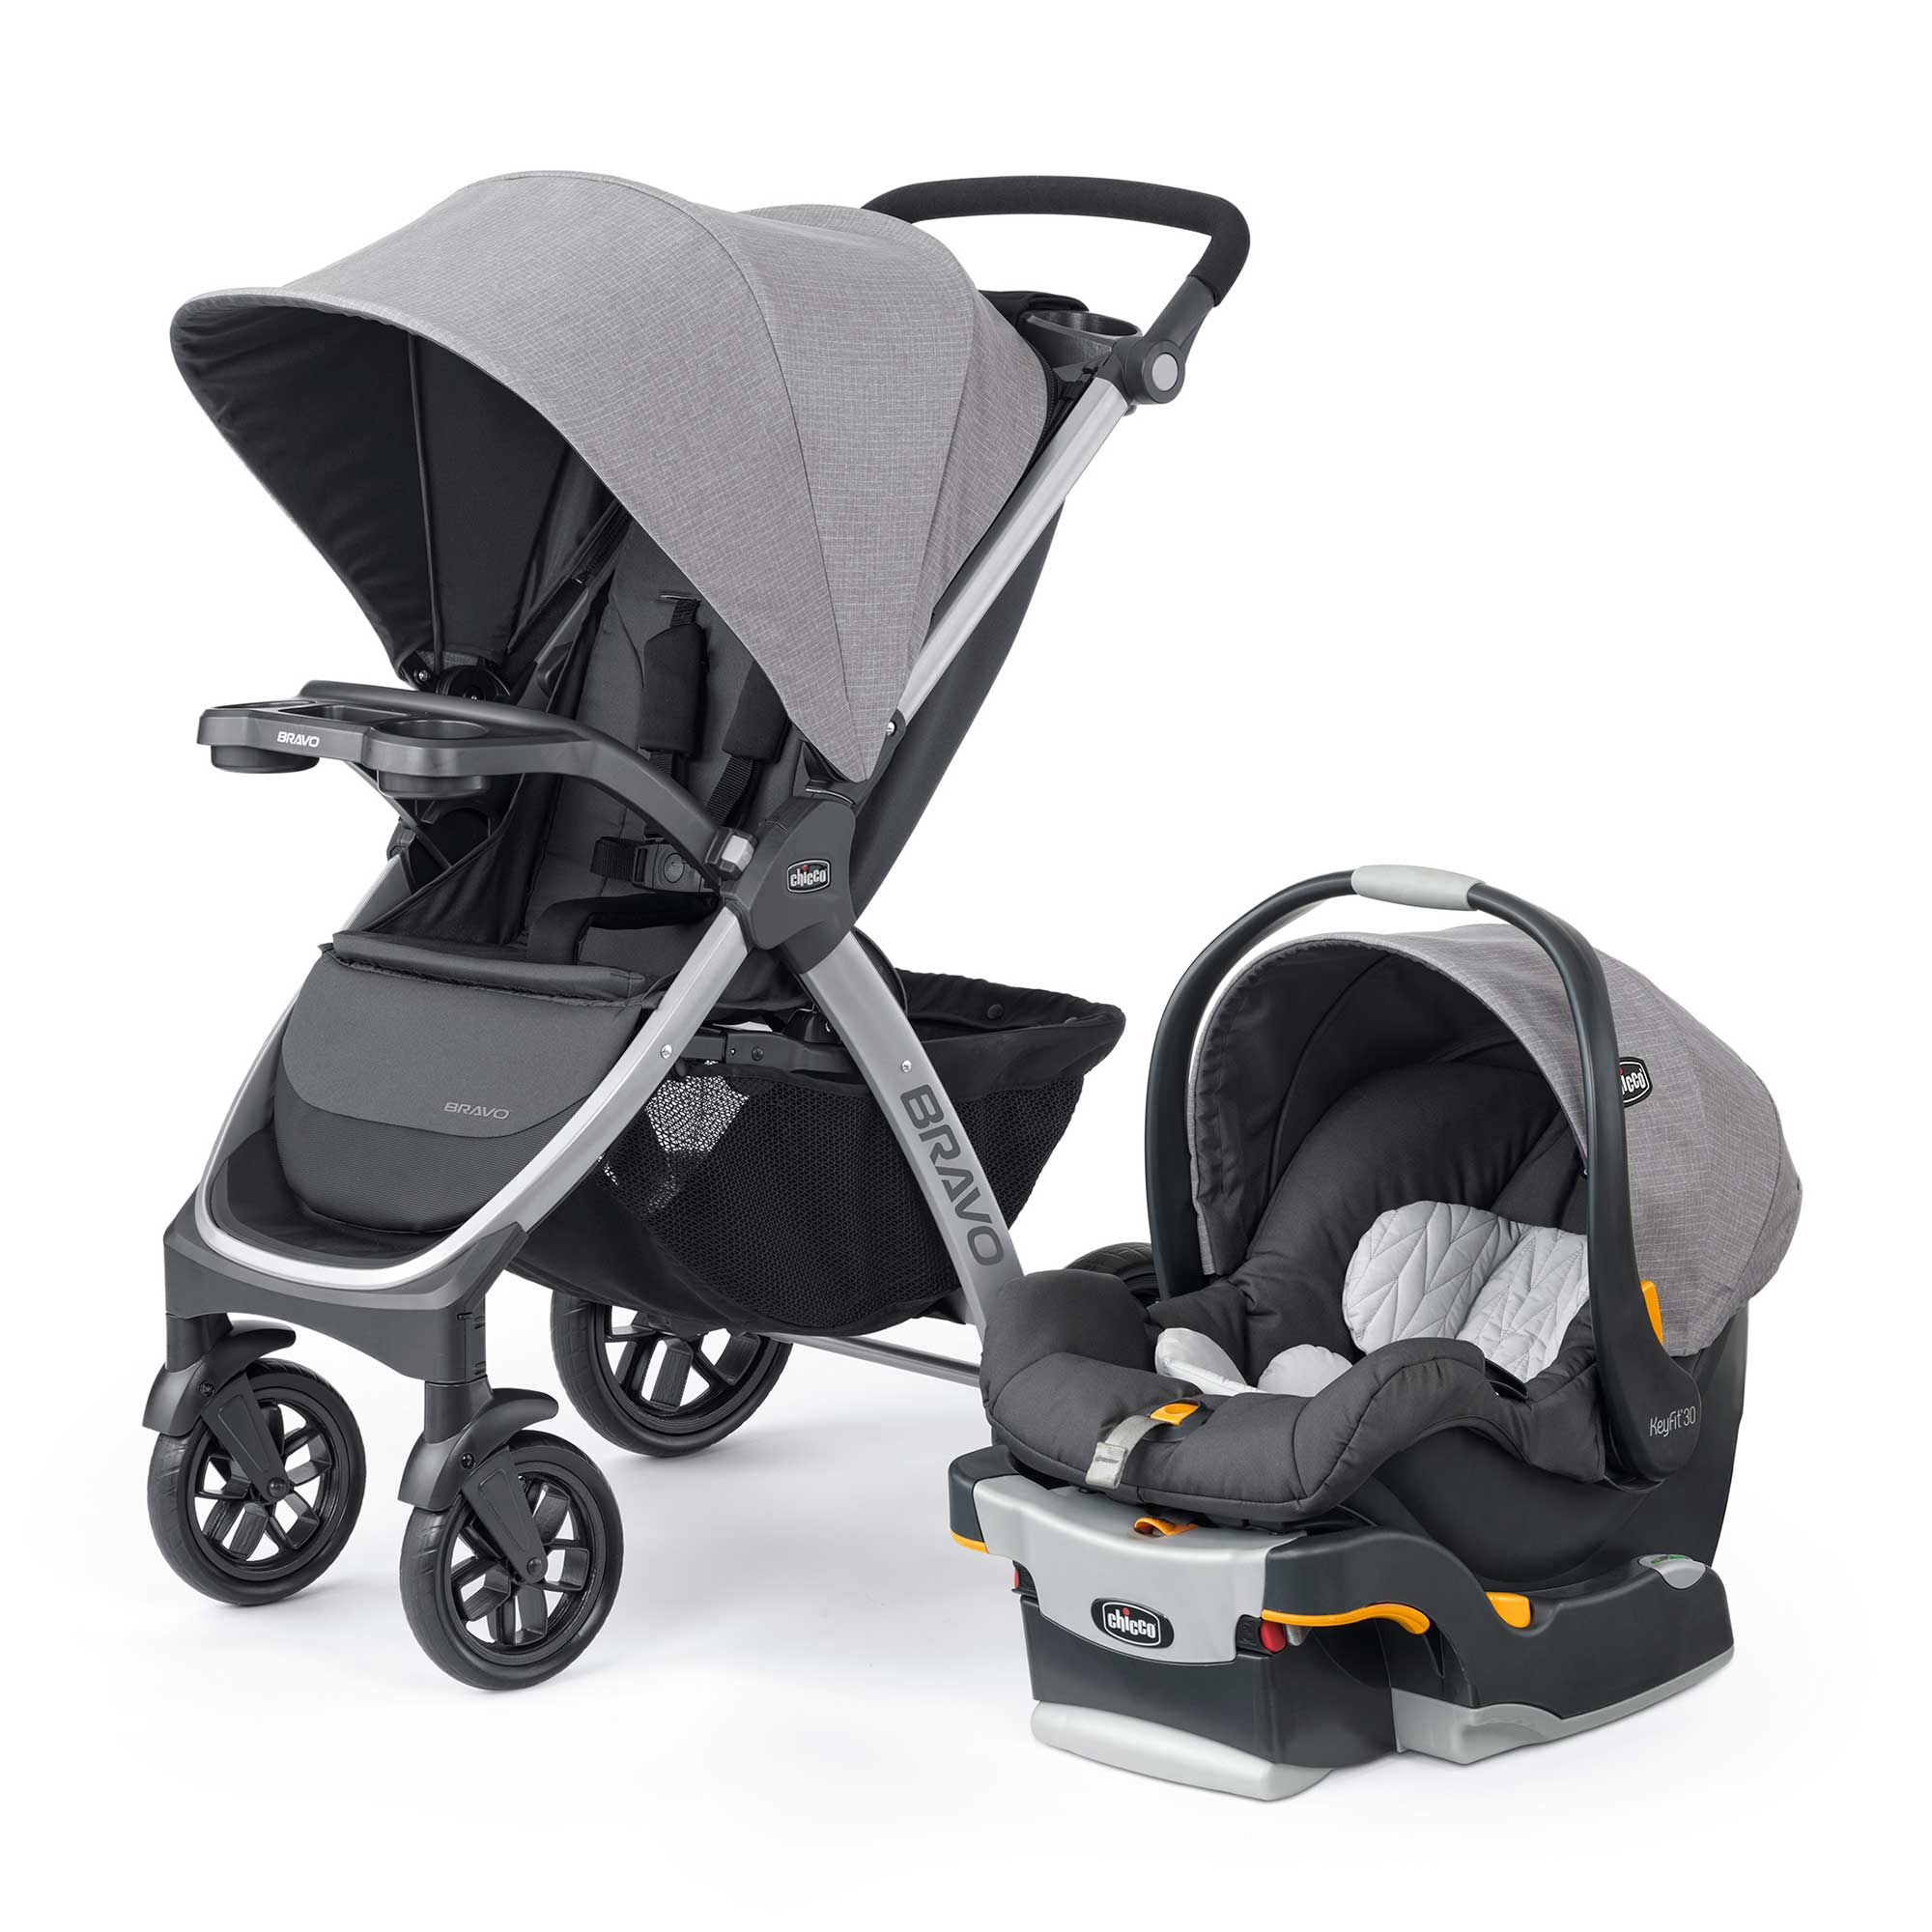 Baby pram Car Seat Carrycot Travel System 3in1 Pushchair Combi Buggy From Birth 